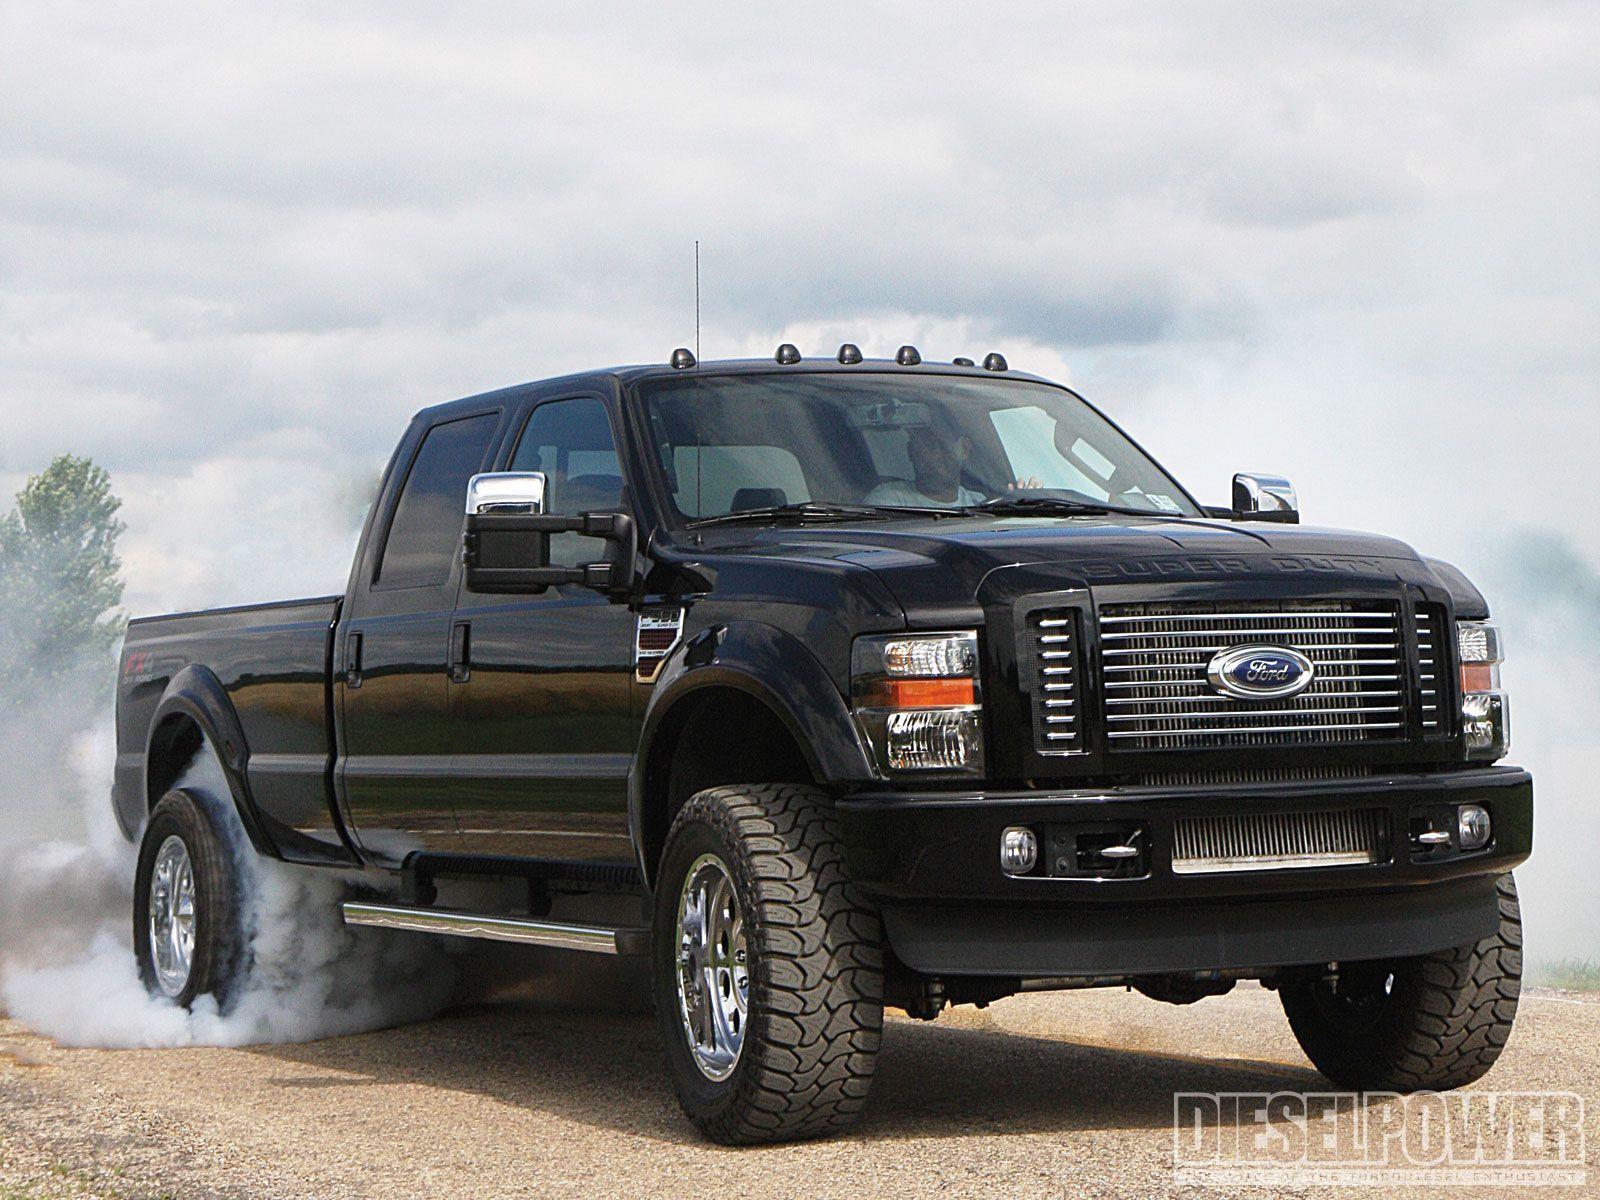 Download Ford Powerstroke Wallpapers Gallery.